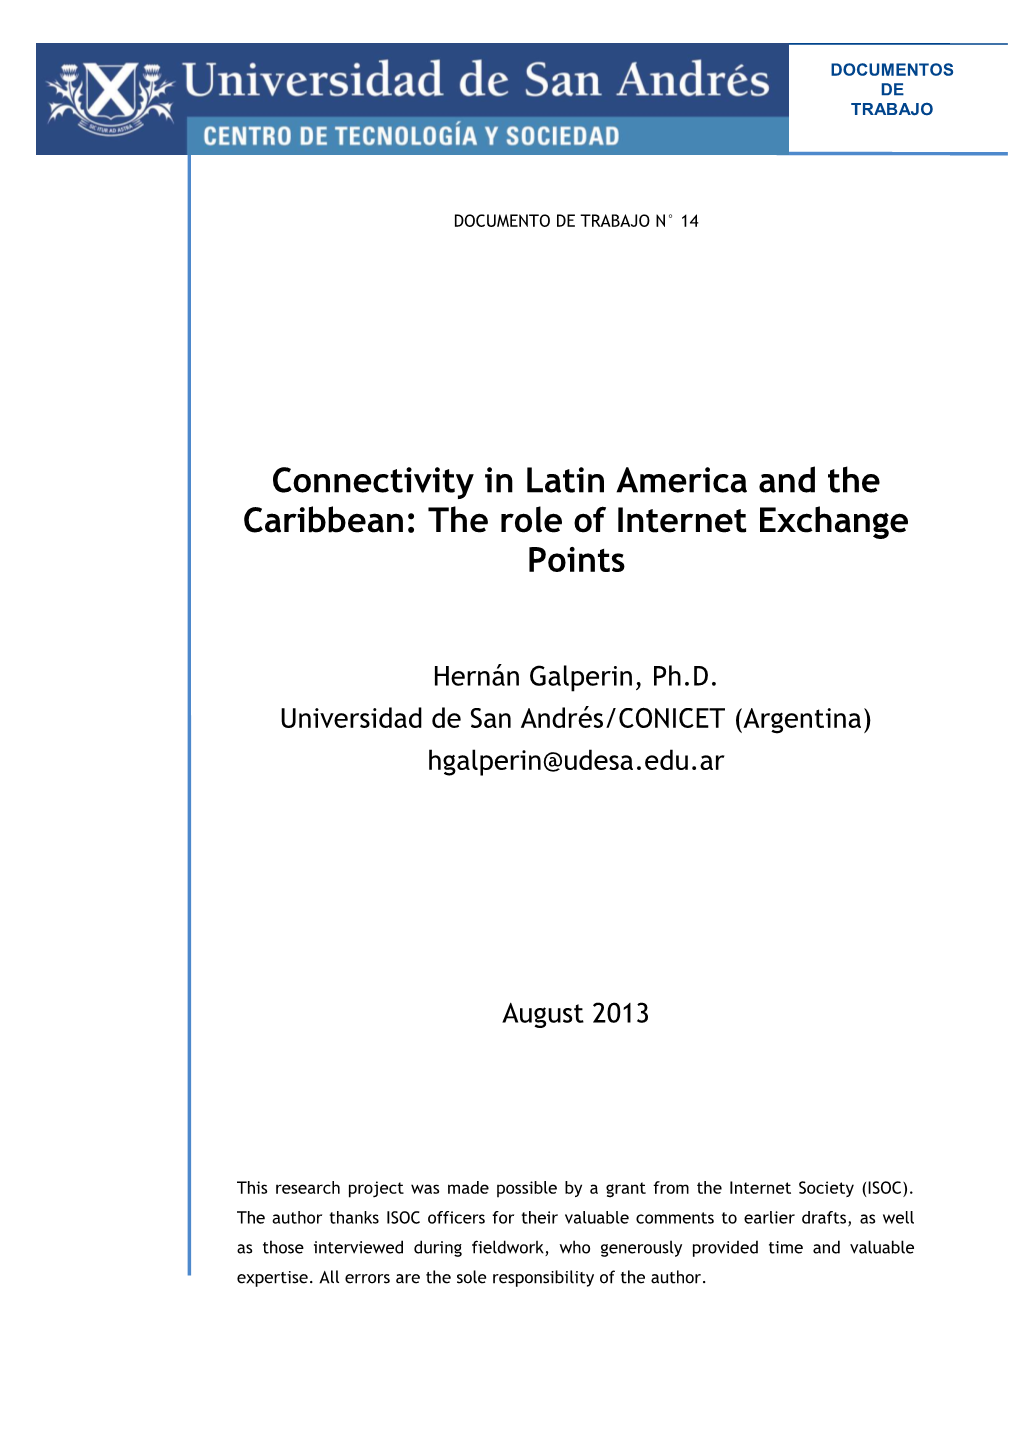 Connectivity in Latin America and the Caribbean: the Role of Internet Exchange Points